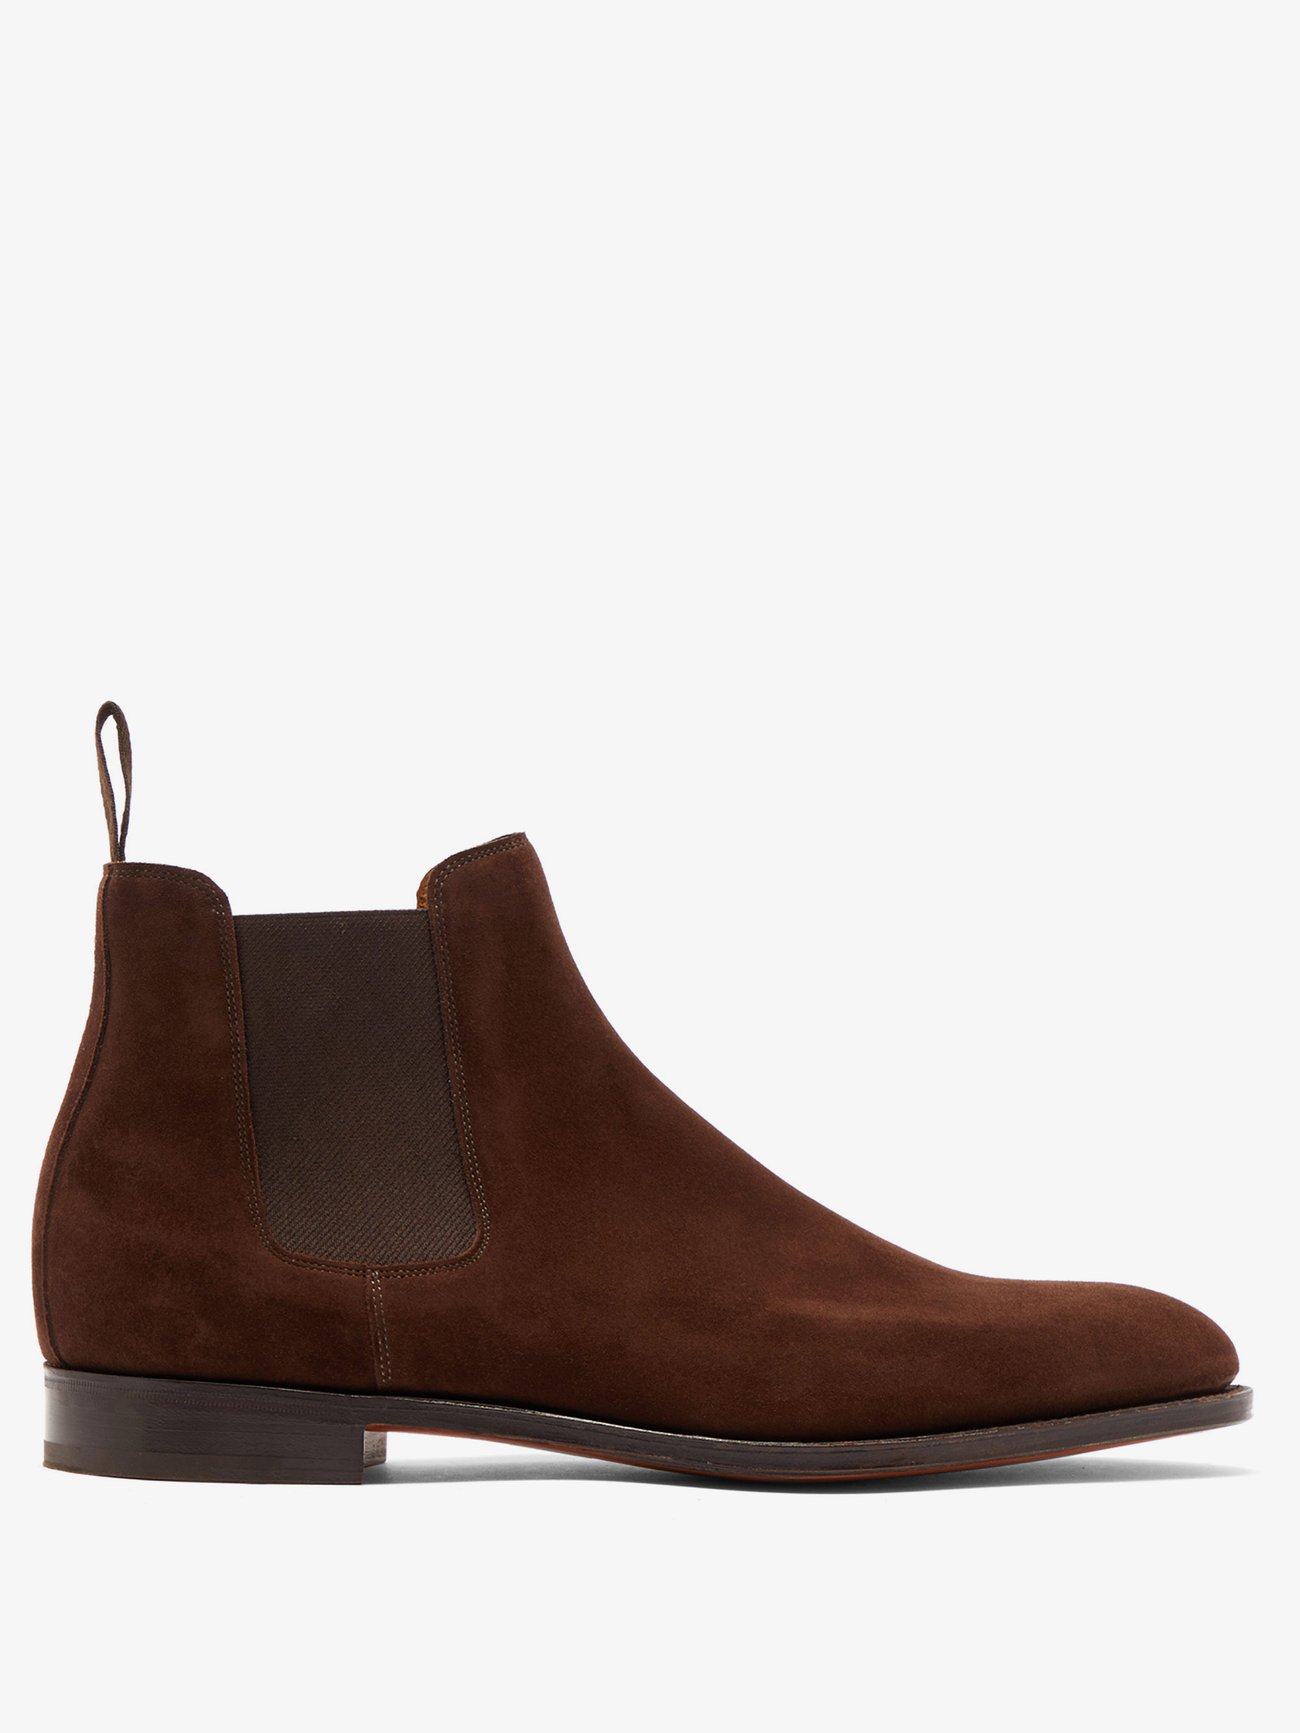 Brown Lawry suede Chelsea boots | John Lobb | MATCHES UK